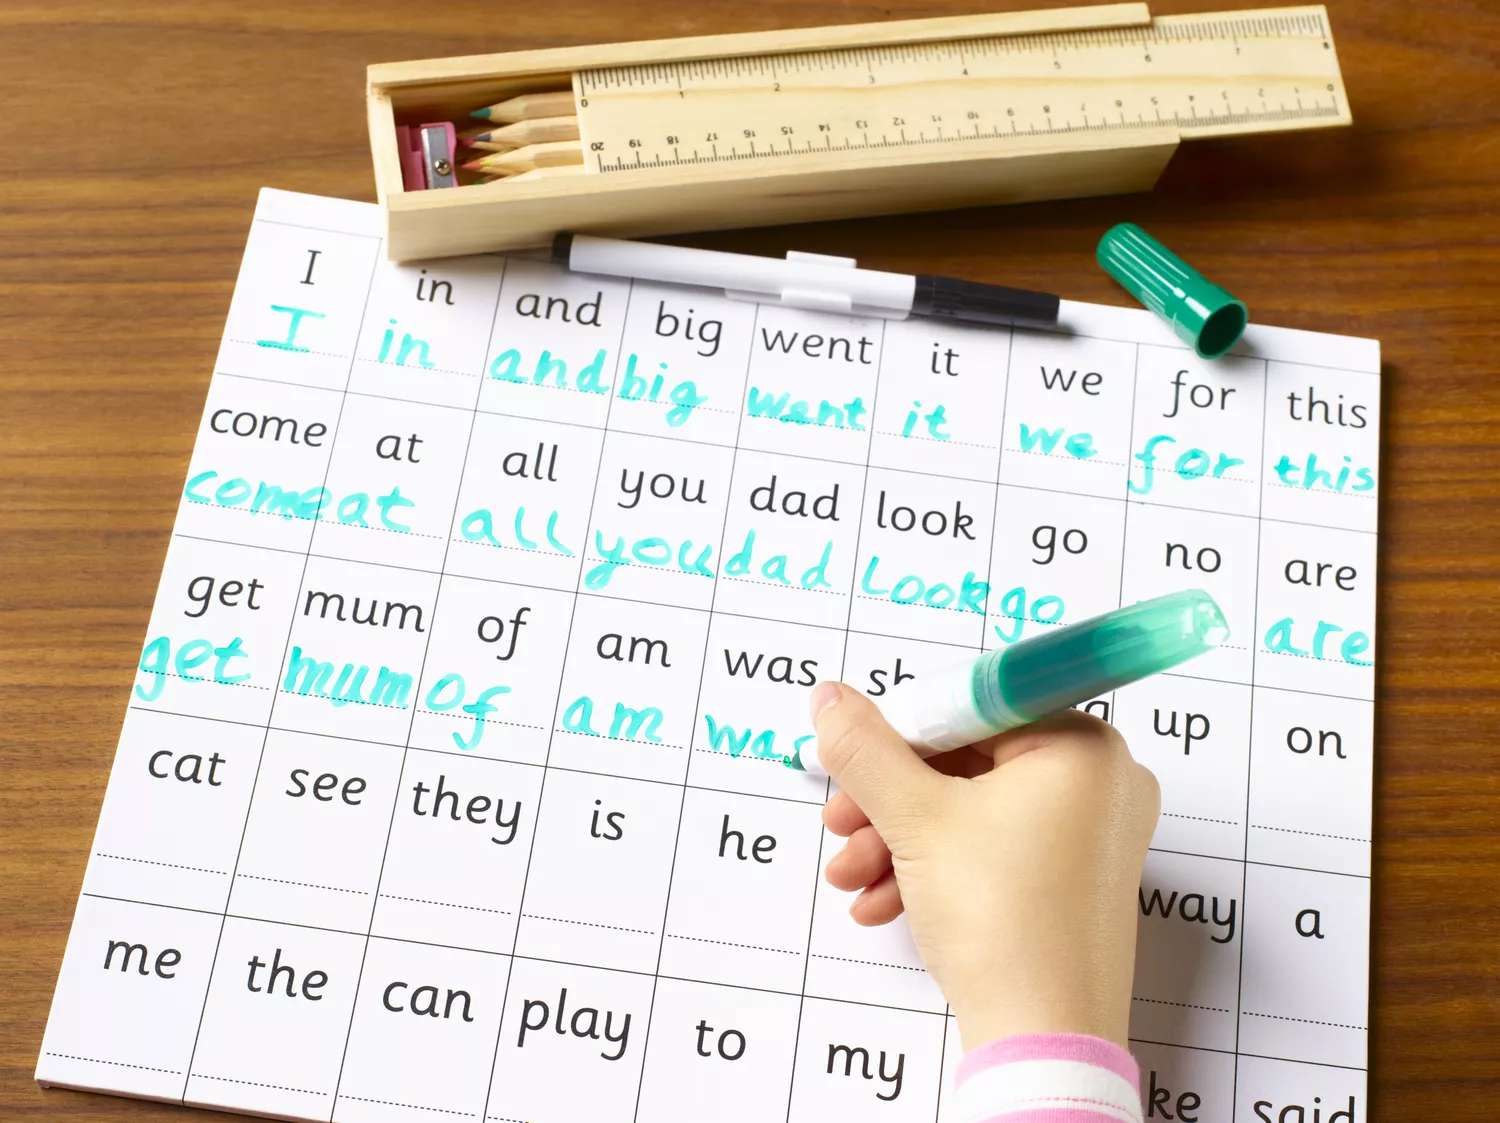 Child practicing handwriting and spelling